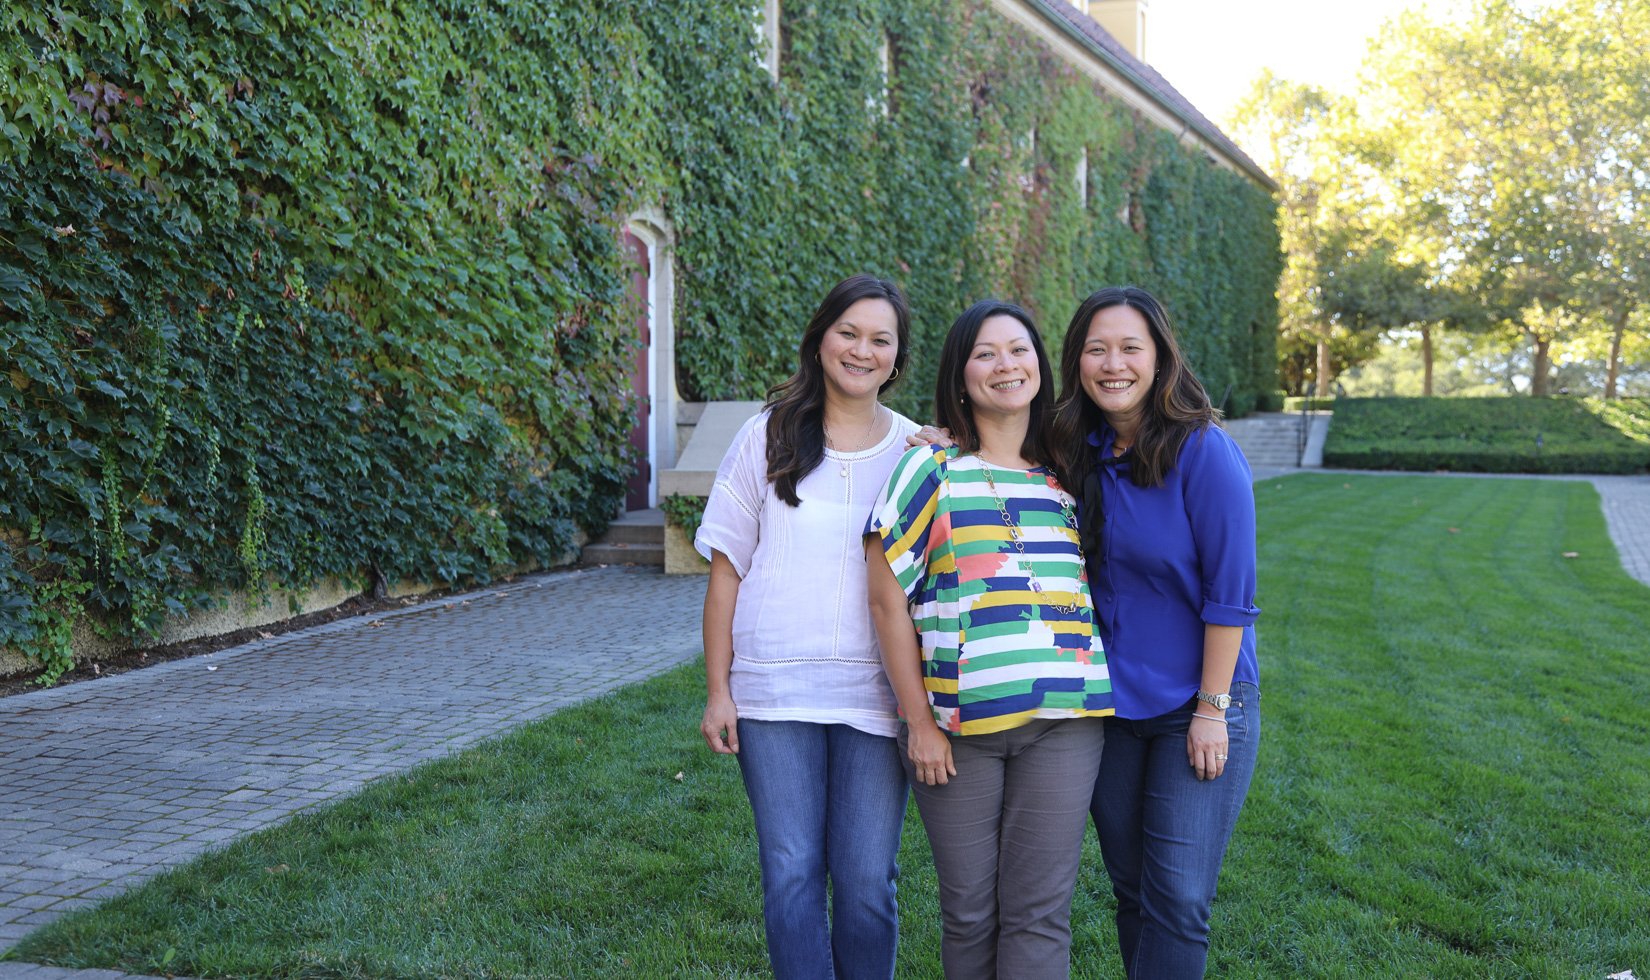 3 women at Jordan Winery in wine country casual attire. They're wearing nice jeans and blouses.